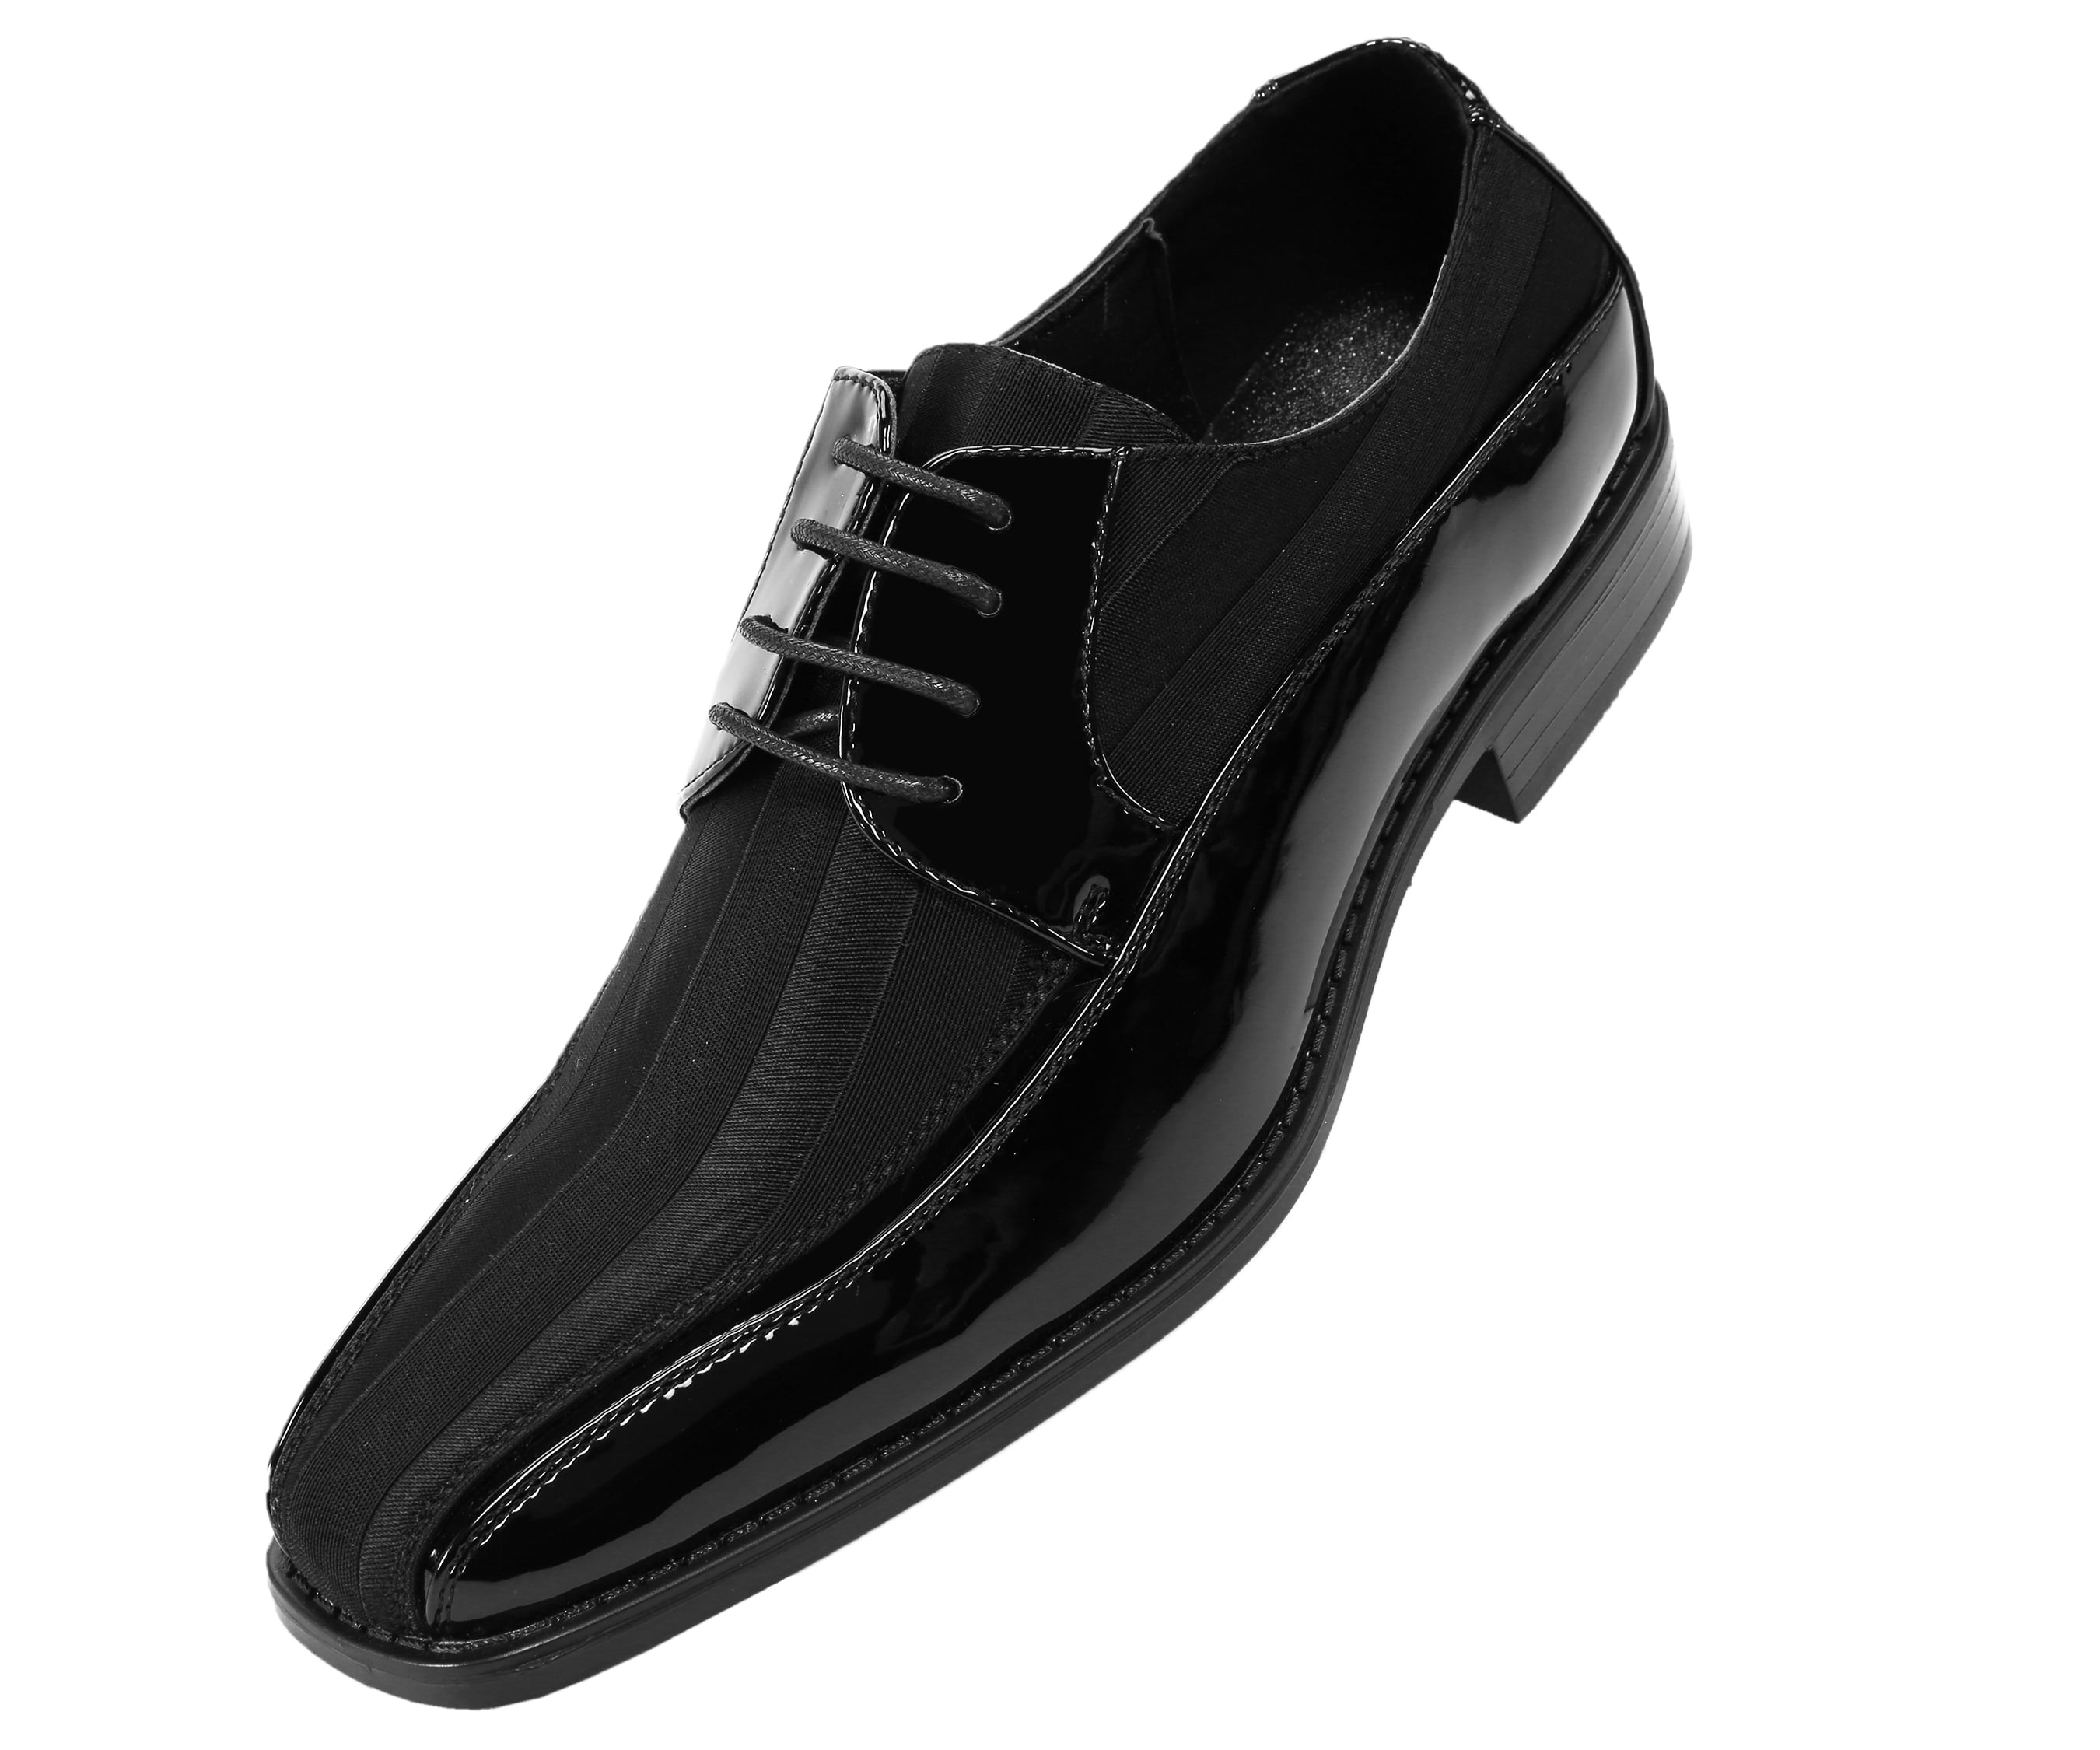 Details about   Dress Leather Mens Lace Up Low Heel Casual Formal Oxfords Shoes Patent Leather 